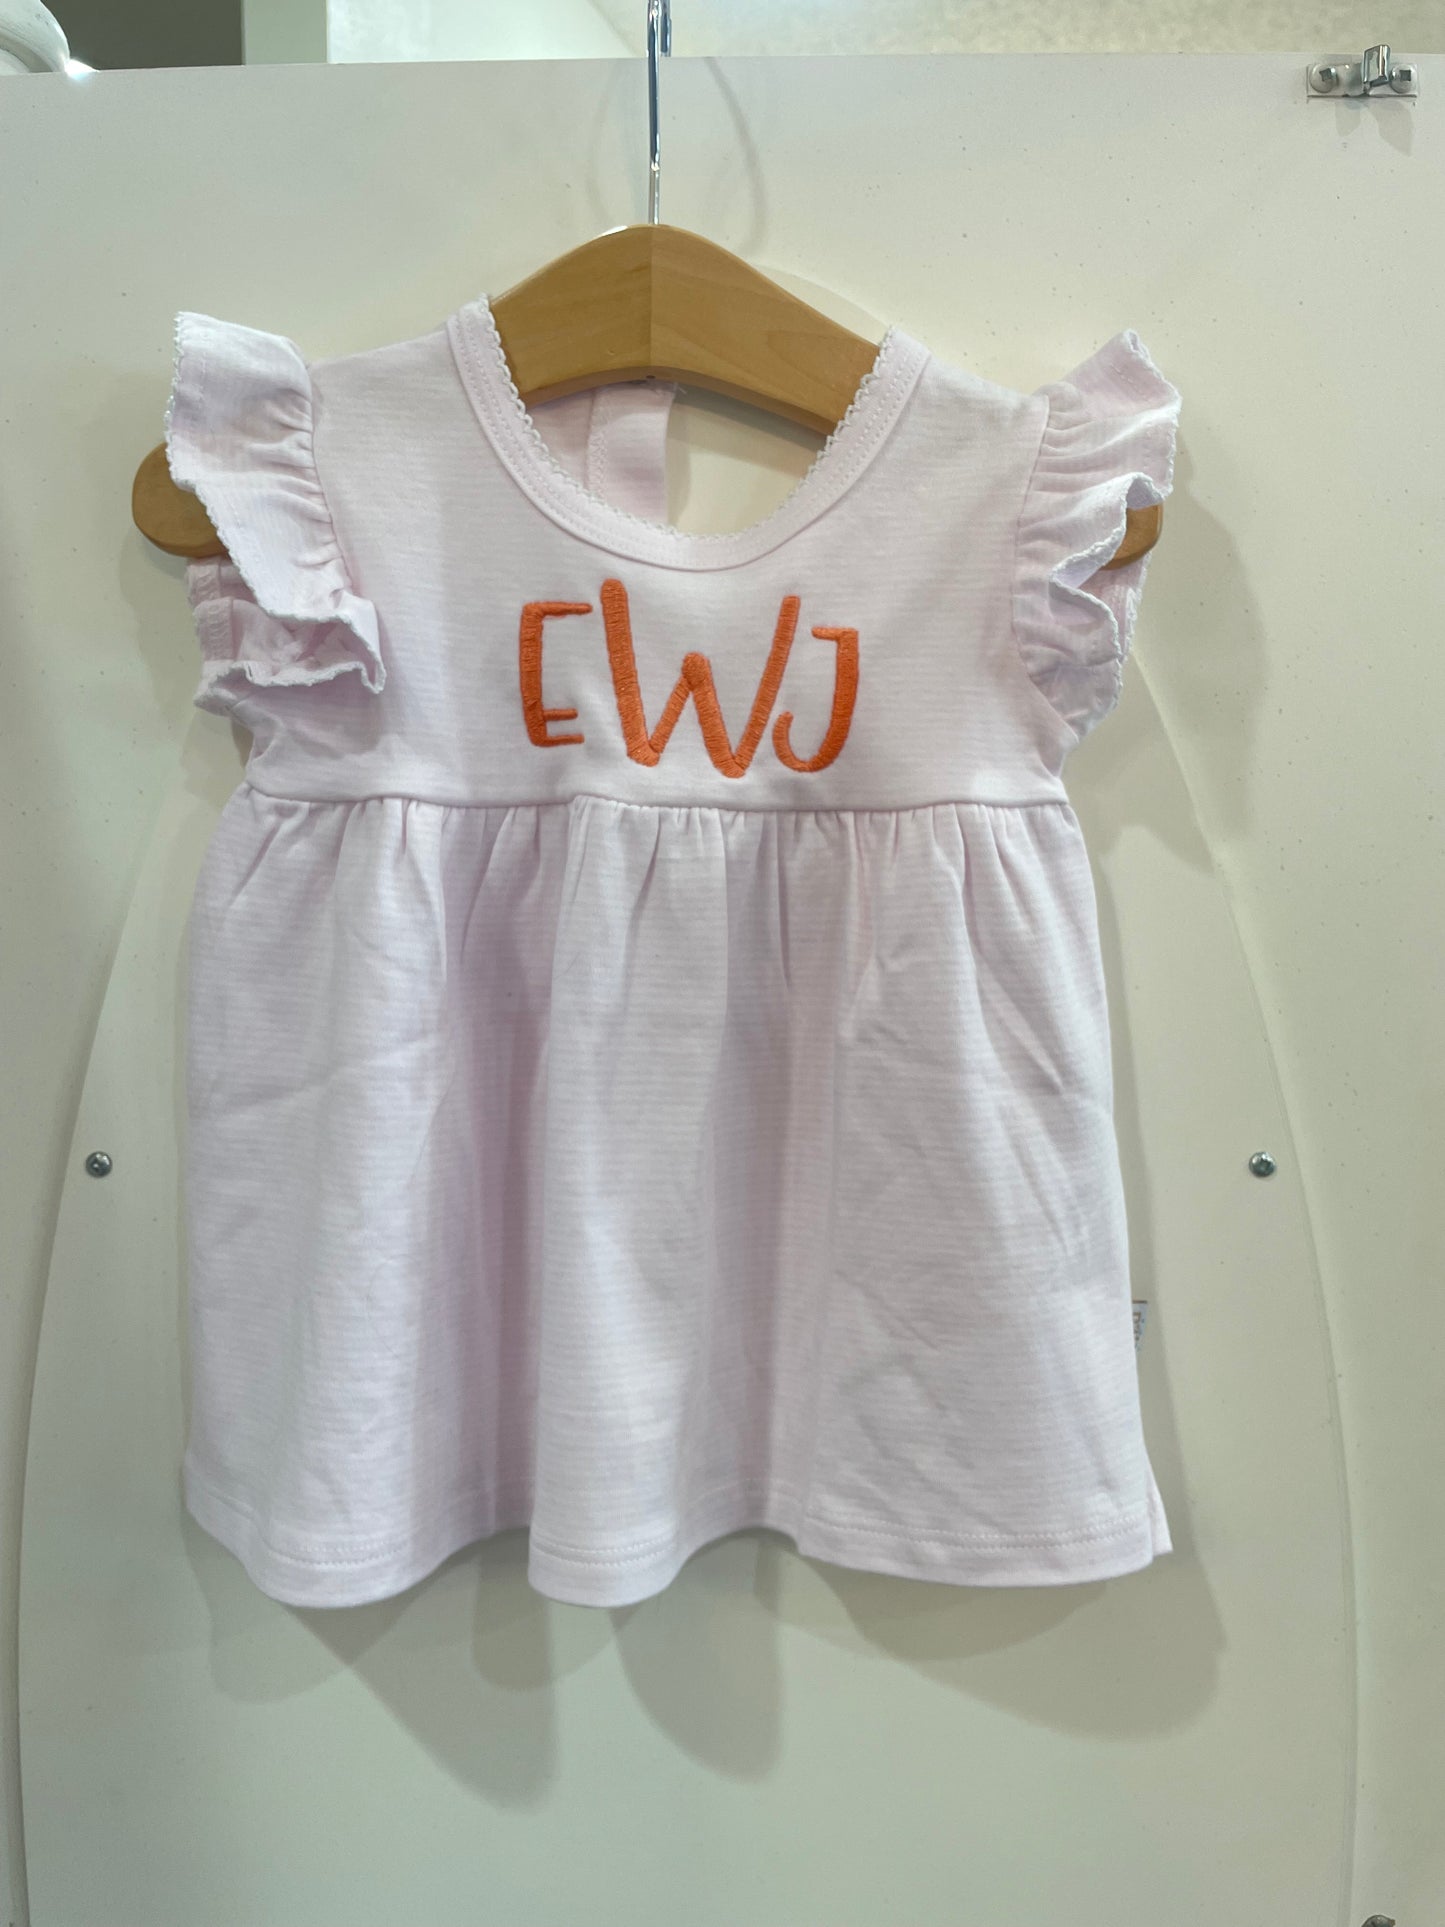 A Paty Ruffle Cotton Dress with orange letters on it.